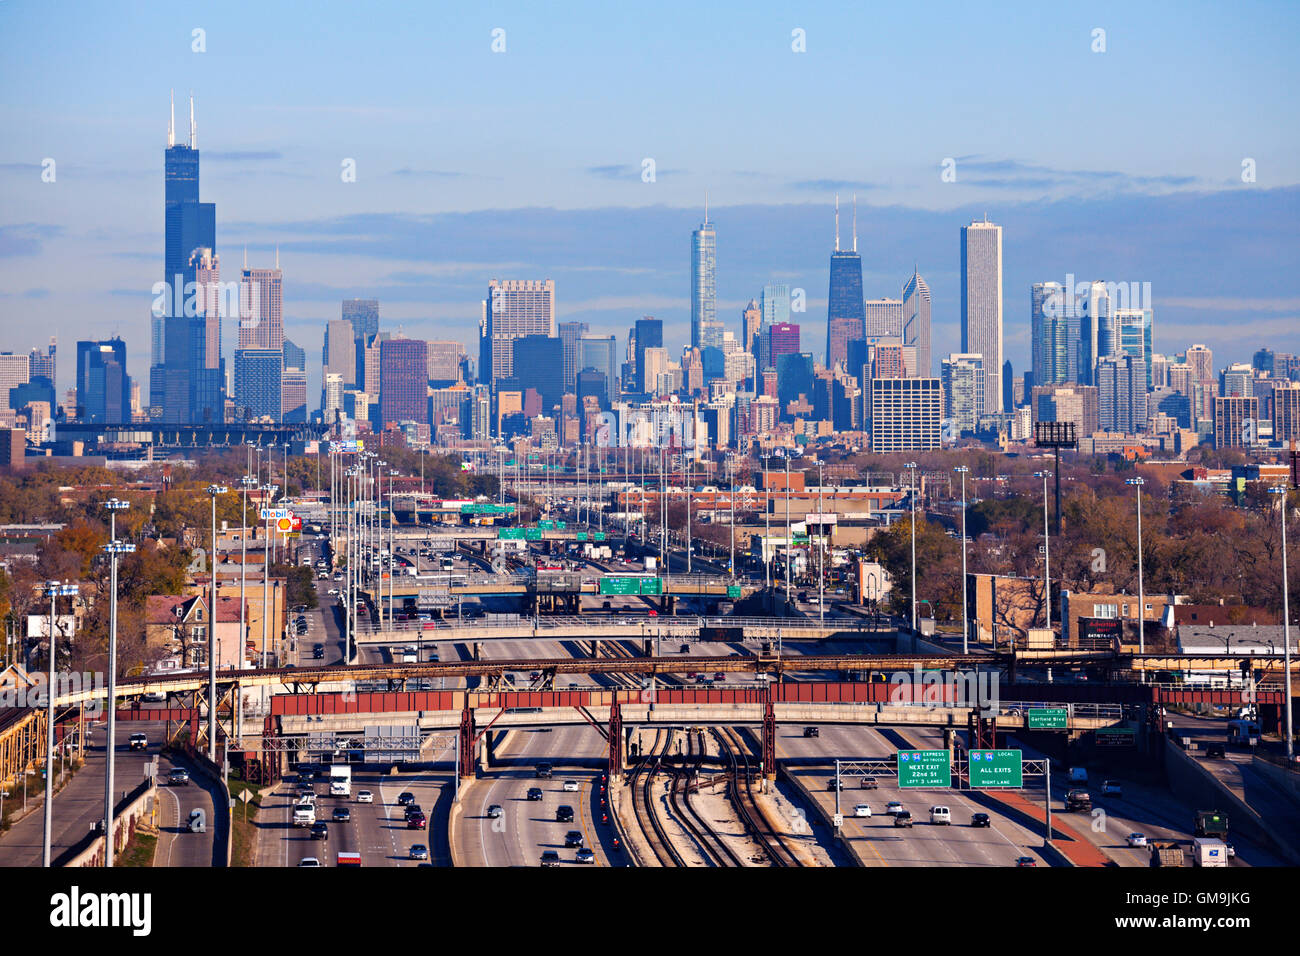 Illinois, Chicago, Urban scene with car traffic and skyscrapers in distance Stock Photo